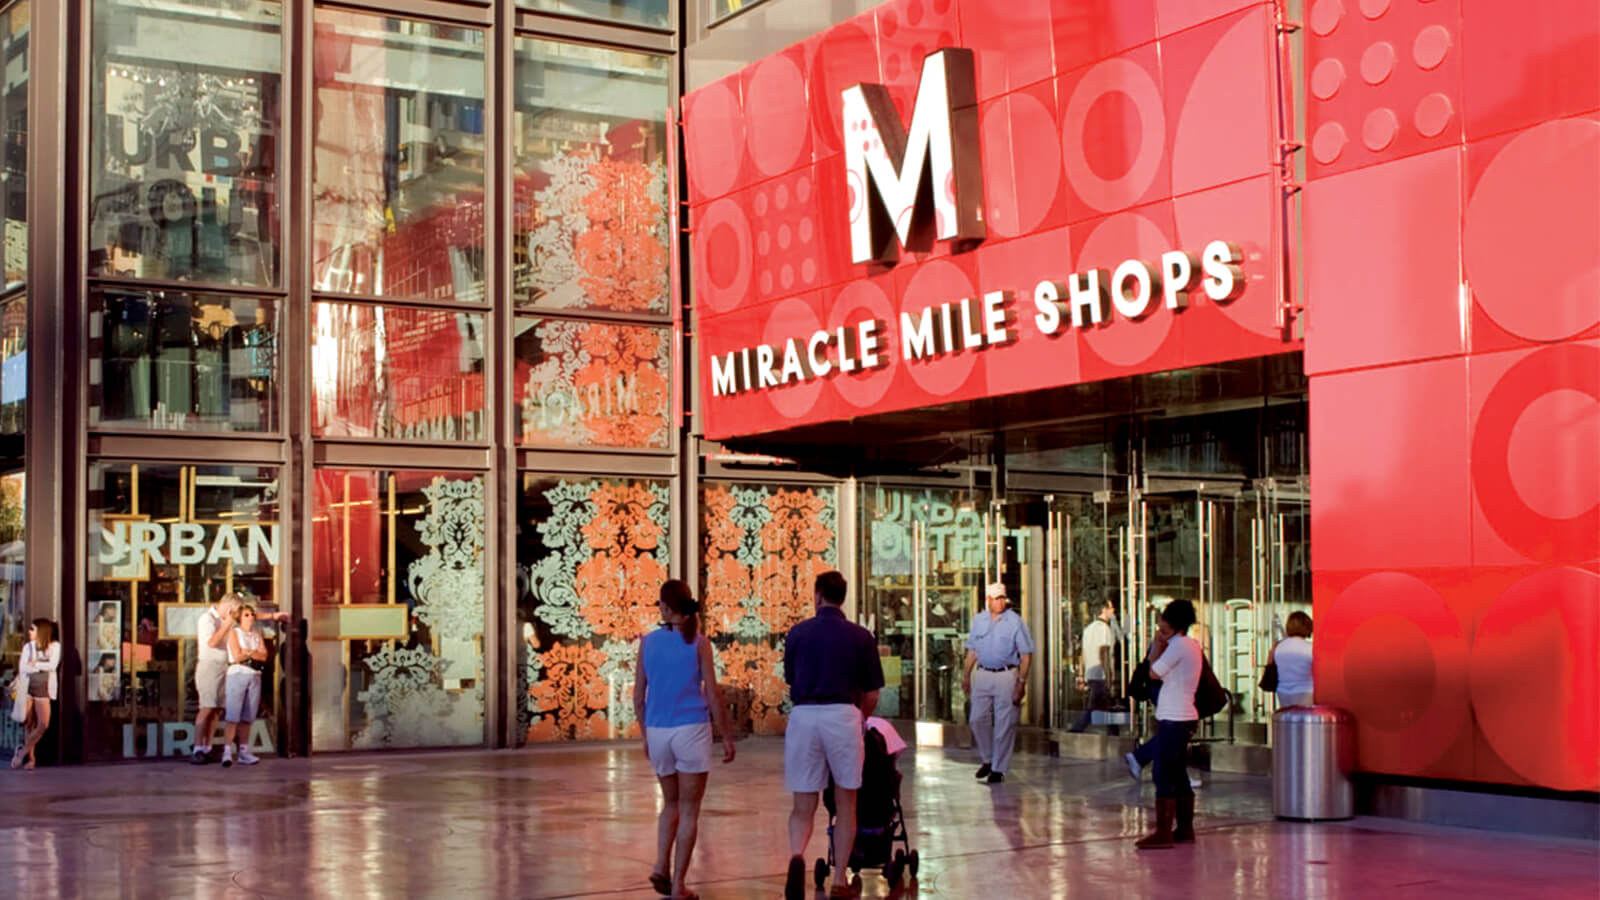 Las Vegas Shopping  From Luxury Shops to Centers and Outlets